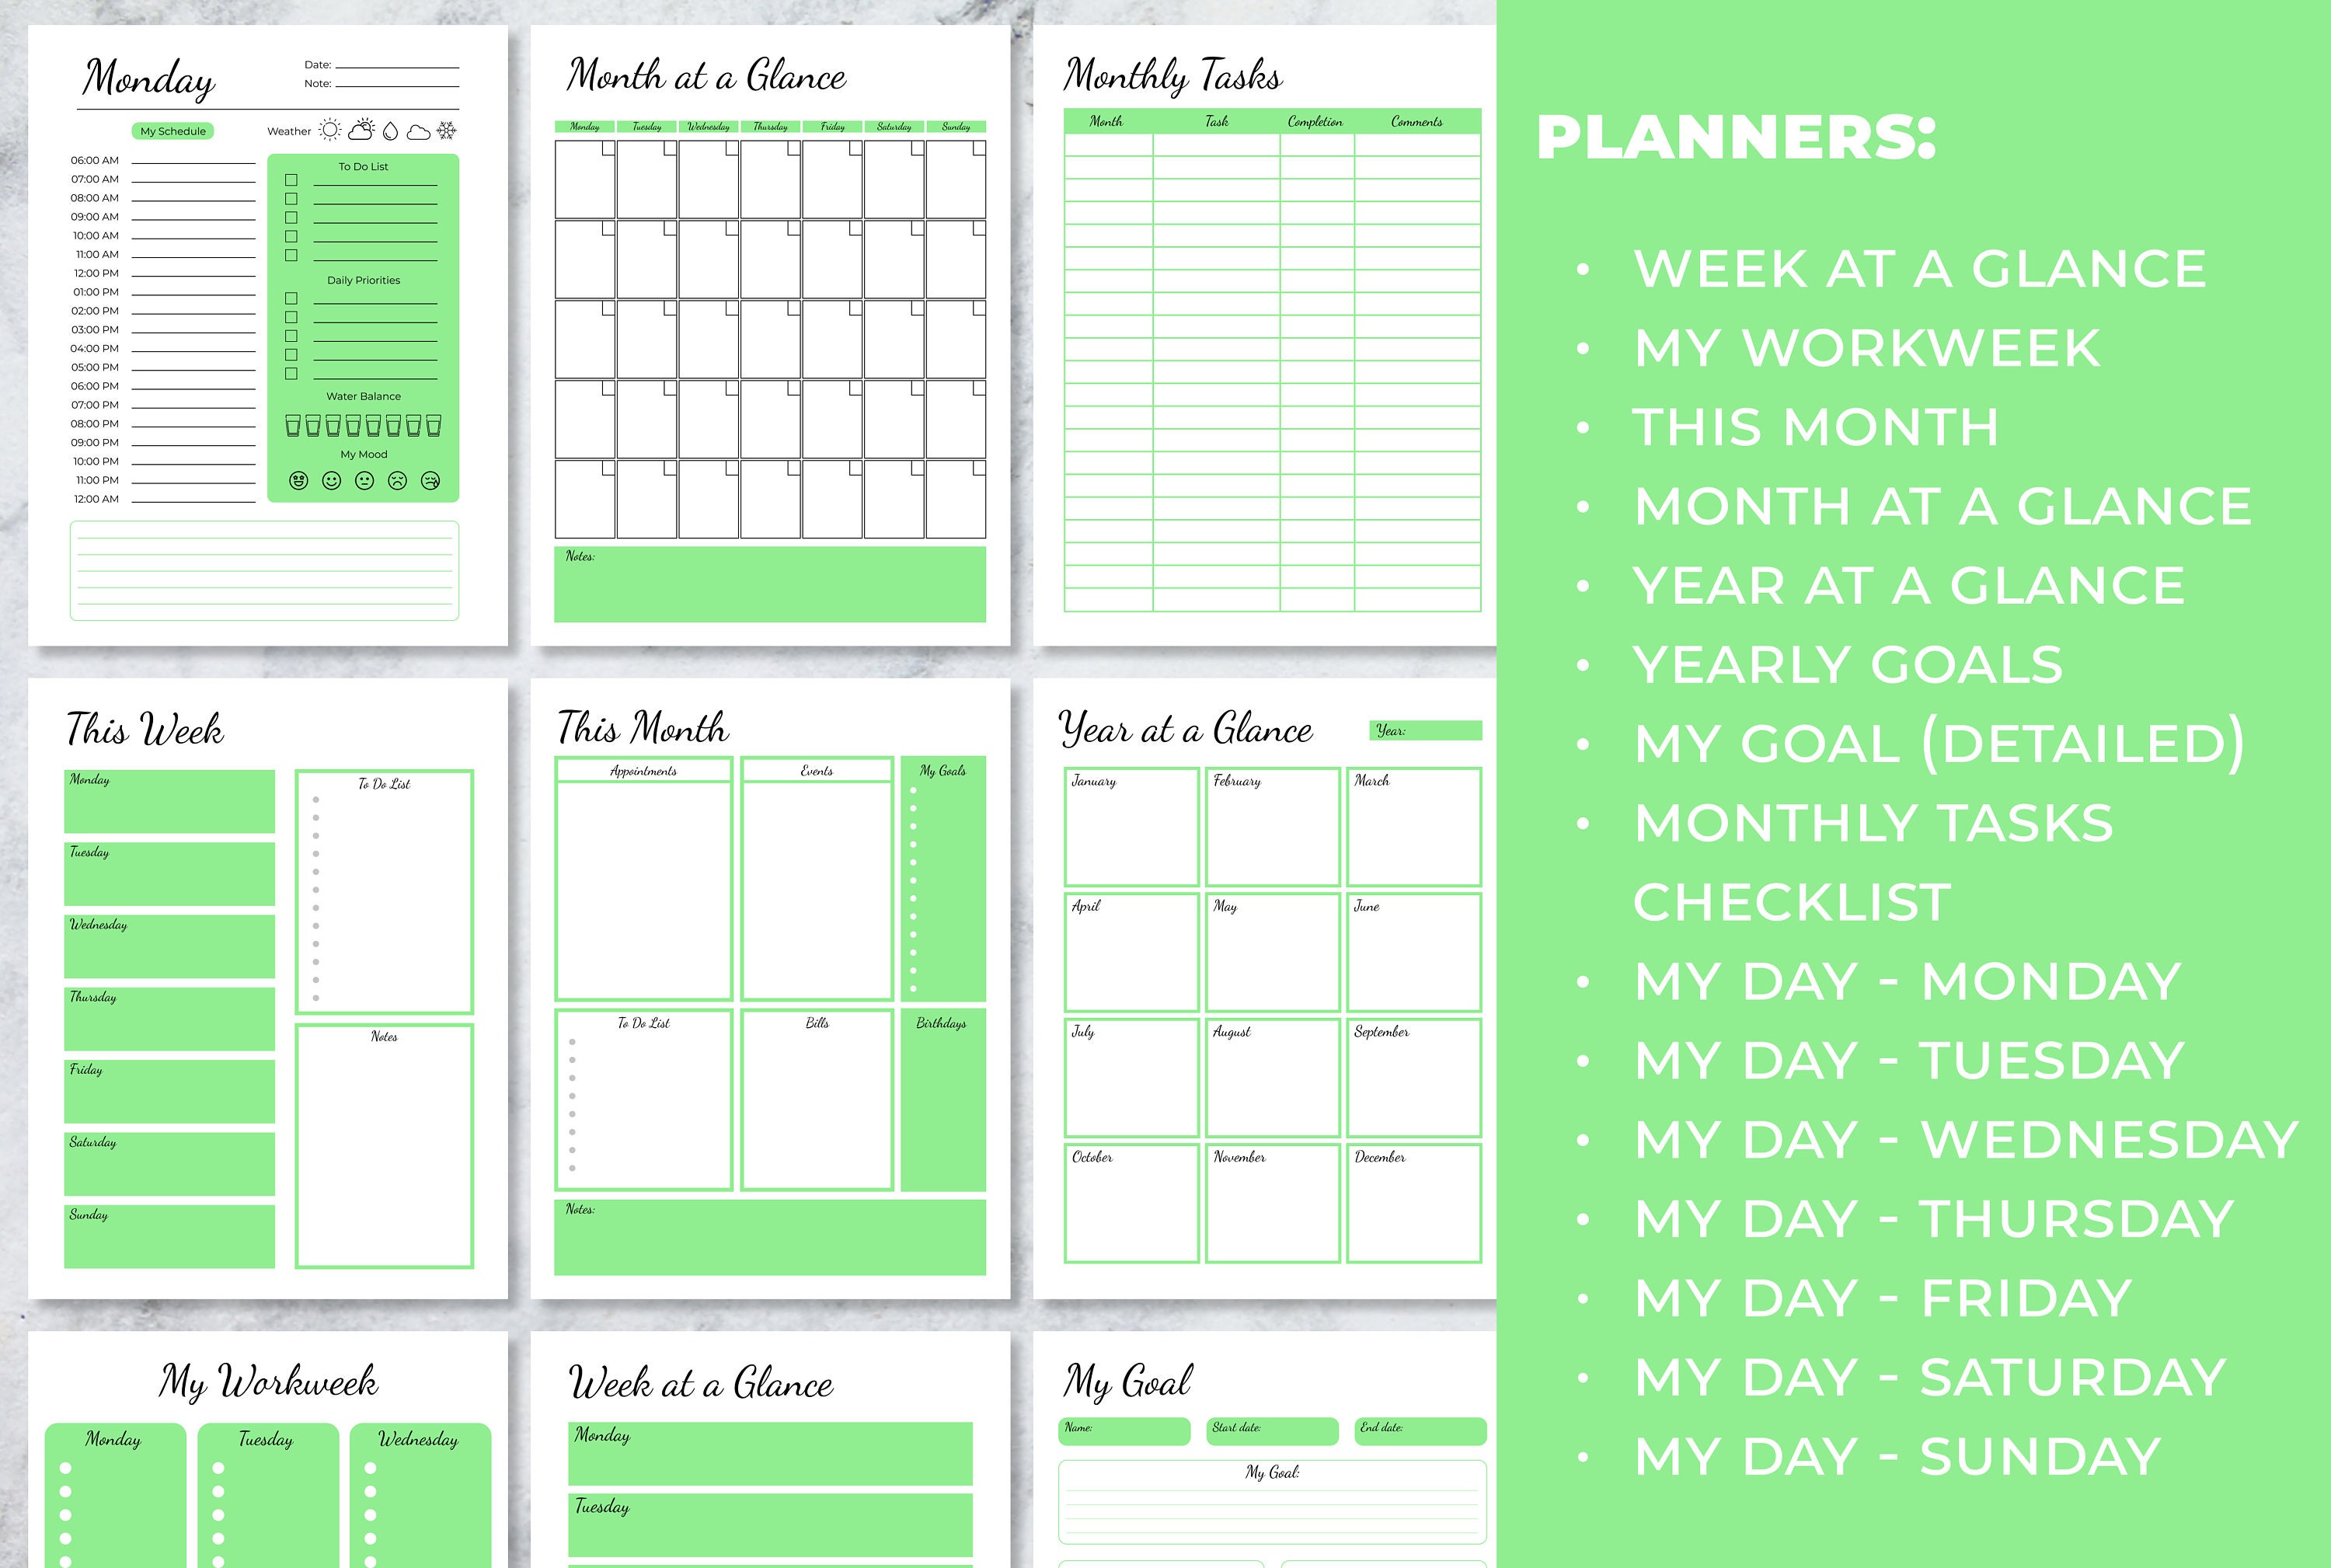 ADHD Planner Adult ADD ADHD Planner for Adults Adhd Mom | Etsy